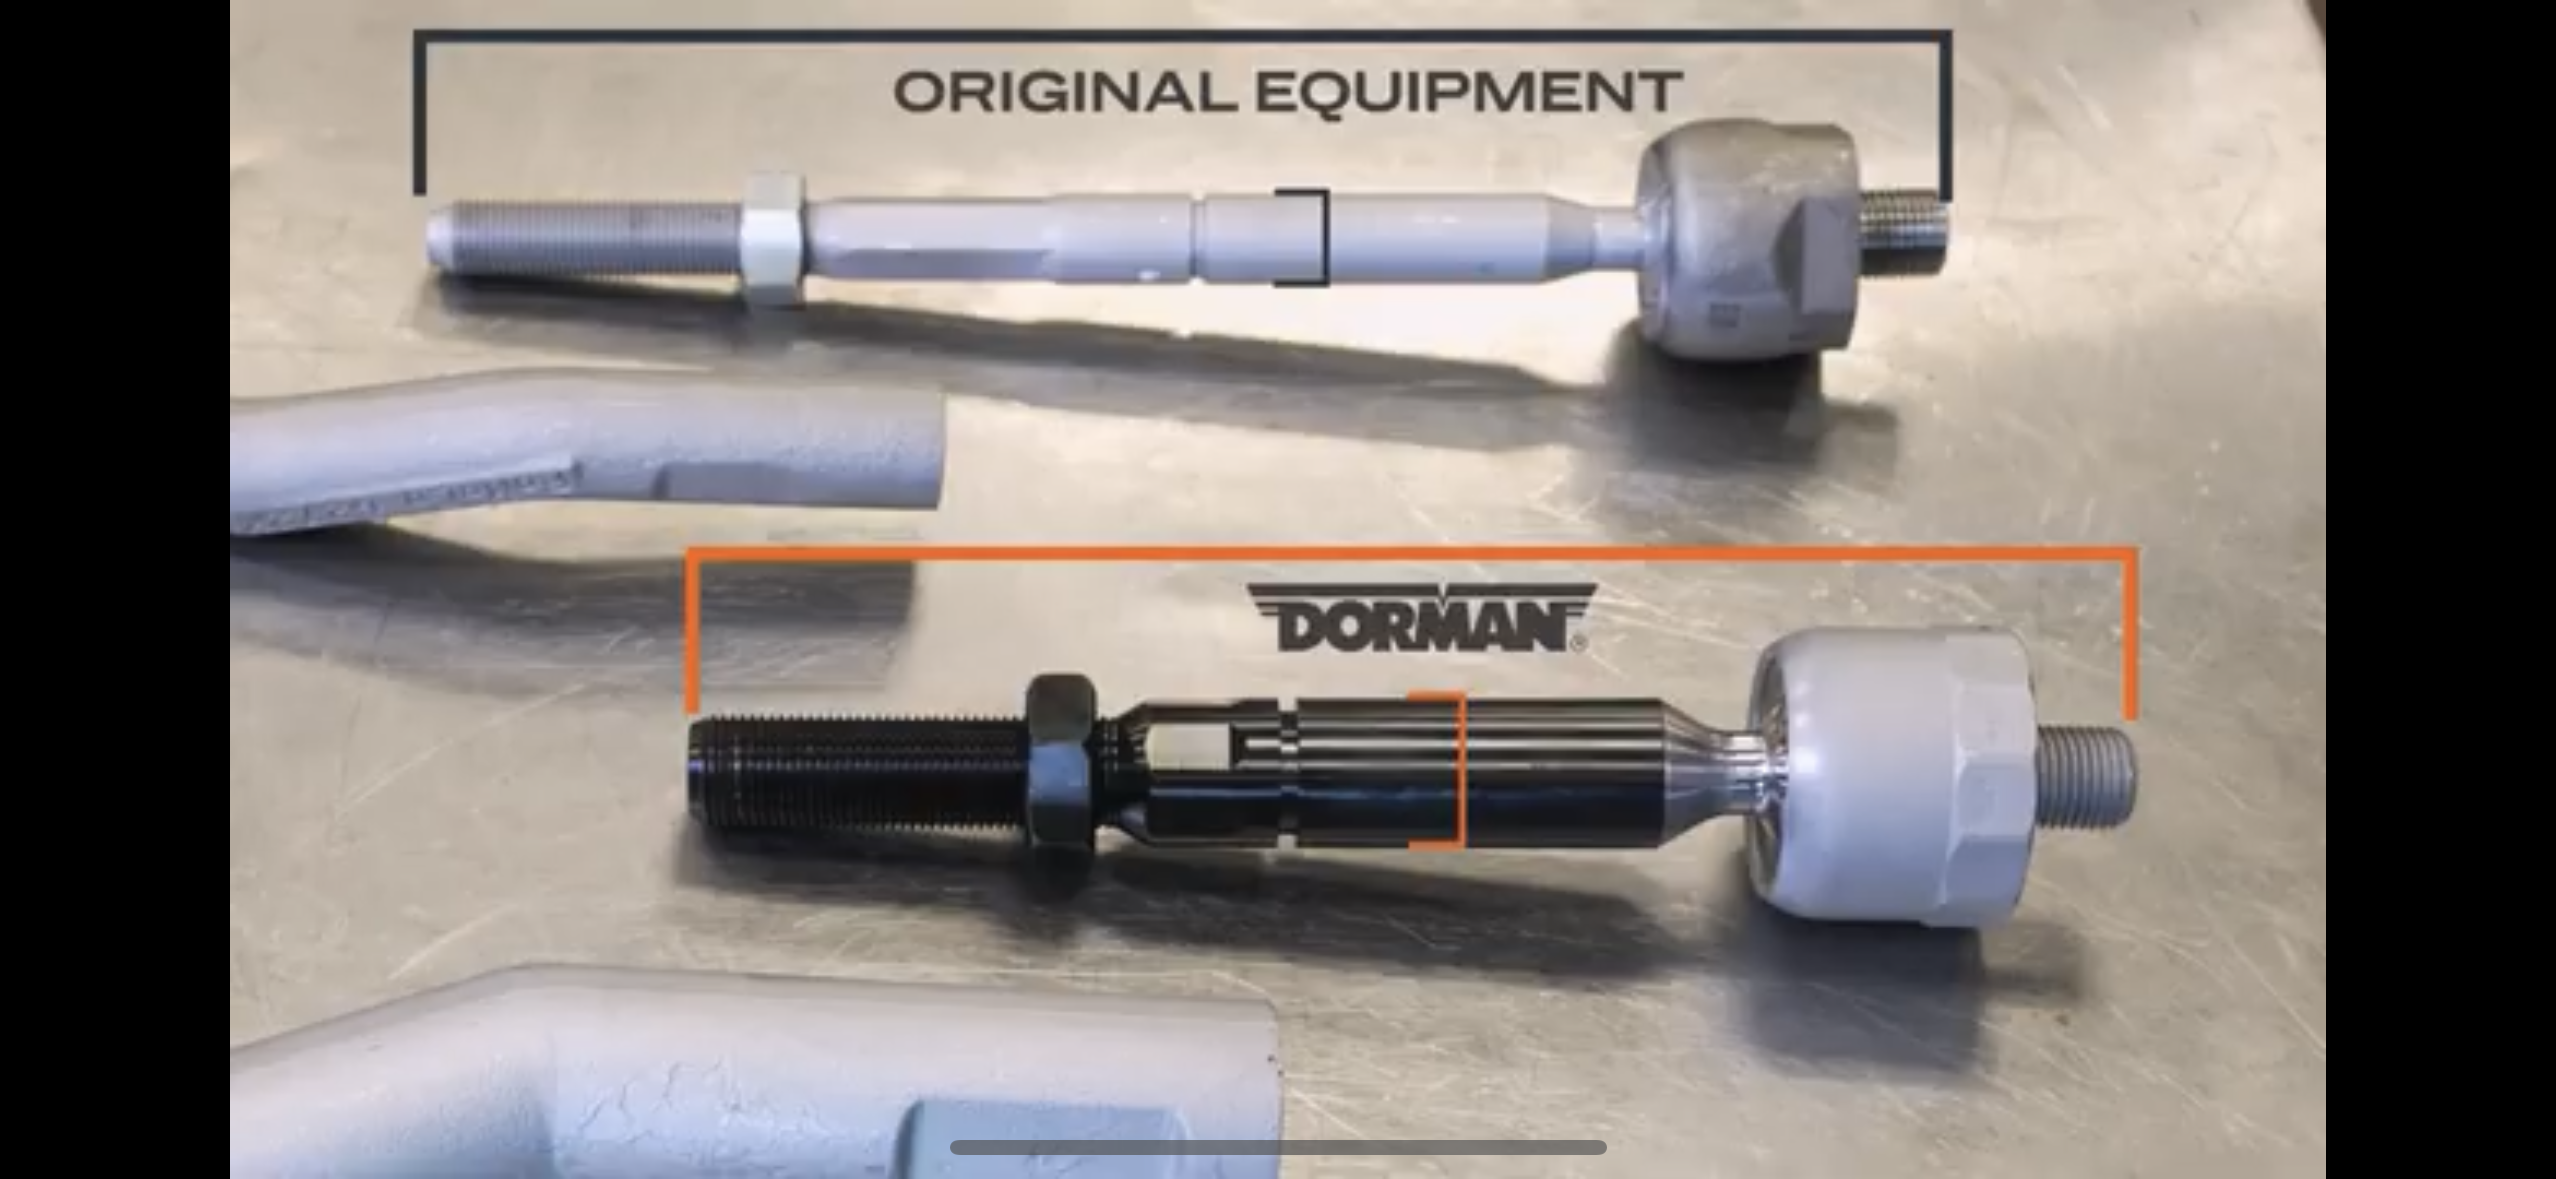 Ford Bronco Another Tie Rod (Dorman) Enters the Chat FC357DD6-4B44-46F8-A557-DBAD97D805D8